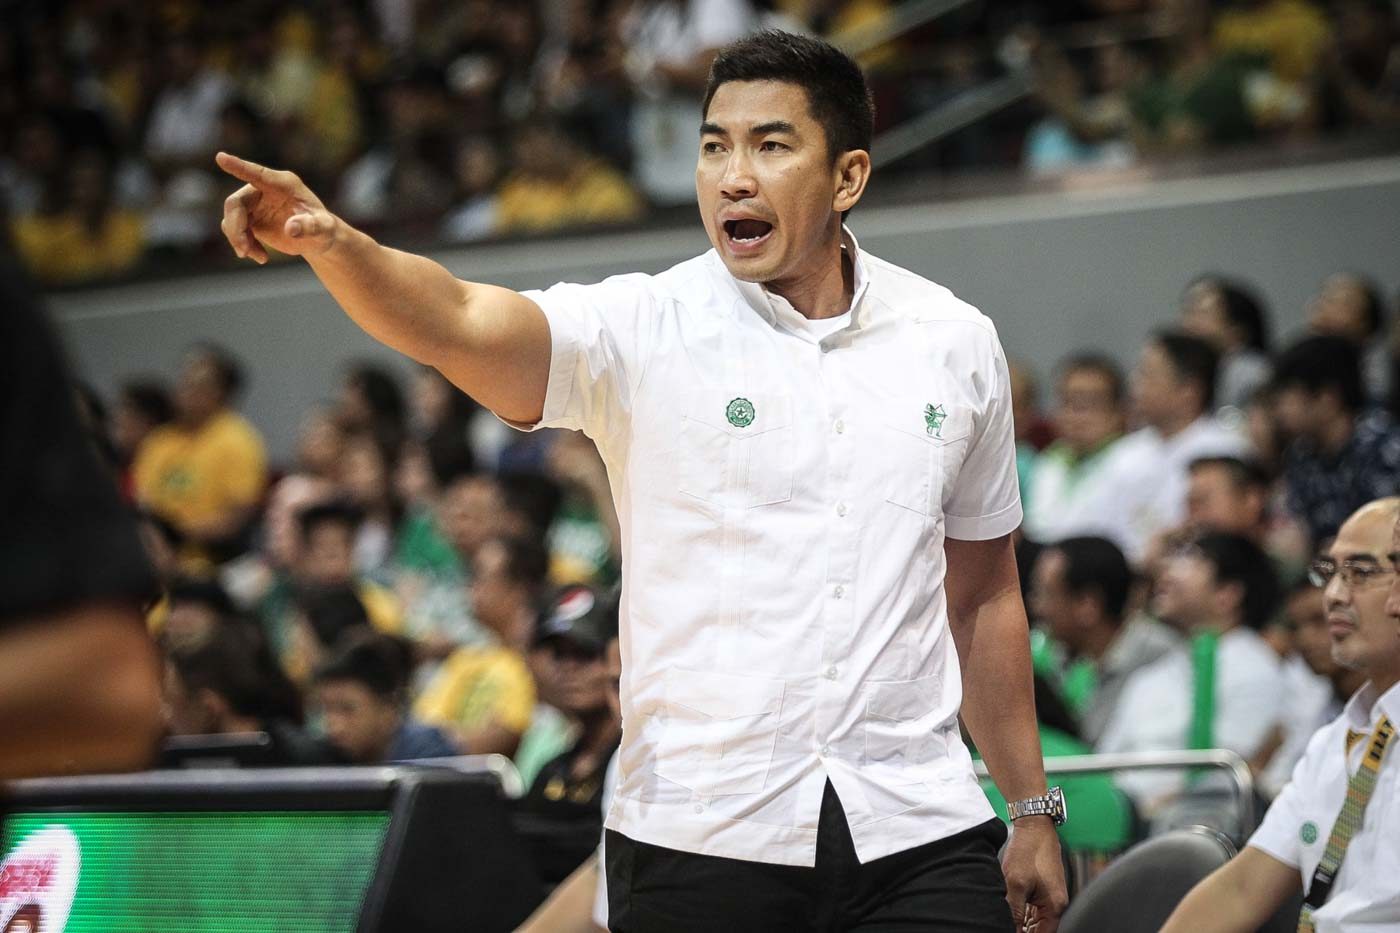 Aldin Ayo to coach UST Growling Tigers ‘for the next 6 years’ – UST’s Varsitarian